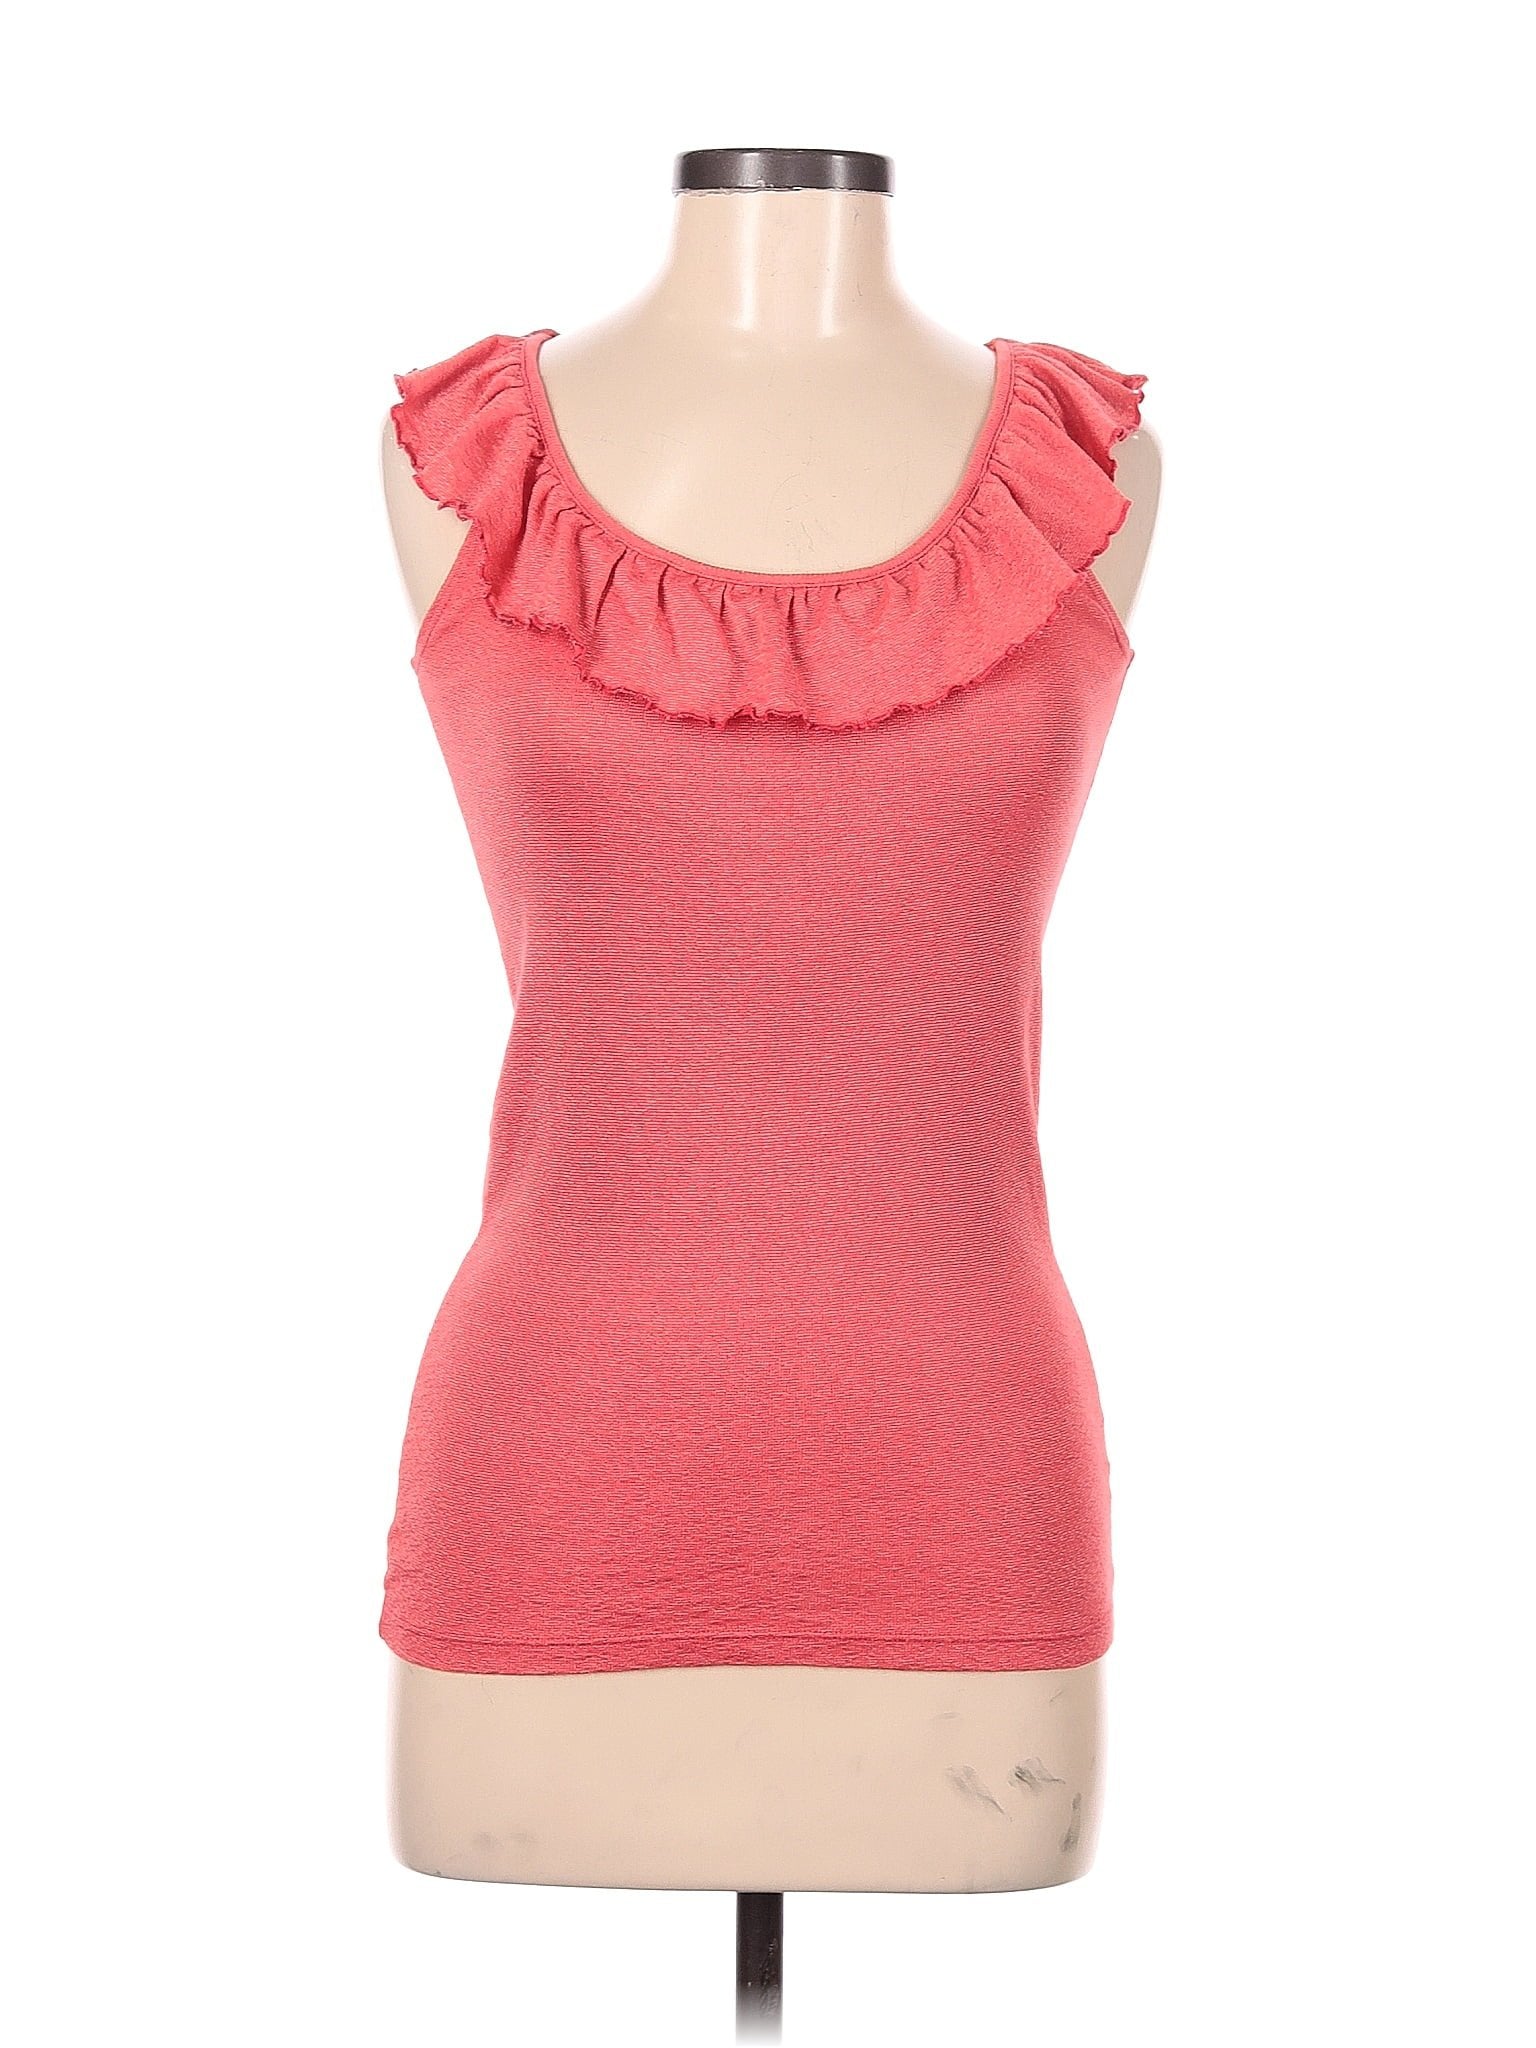 Sleeveless Top size - One Size